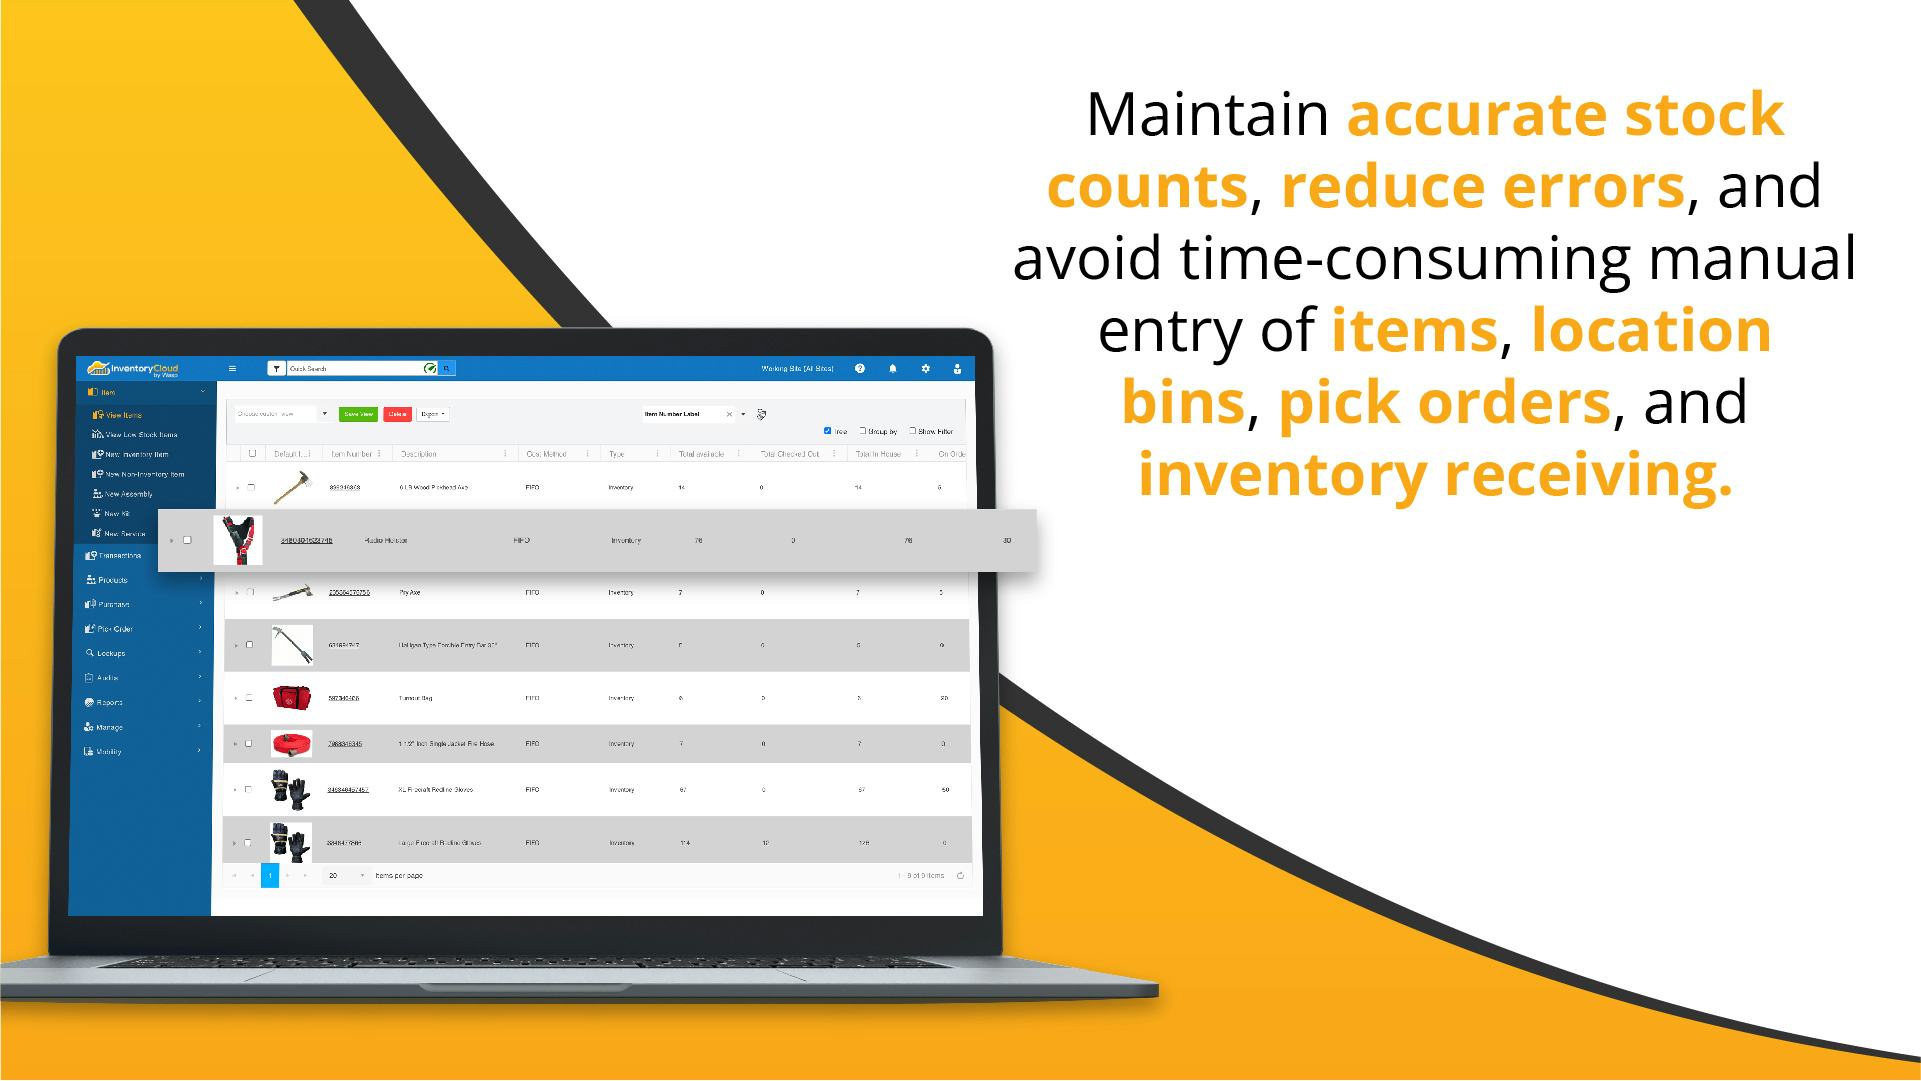 InventoryCloud Software - Maintain accurate stock counts, reduce errors, and avoid time-consuming manual entry of items, location bins, pick orders, and inventory receiving